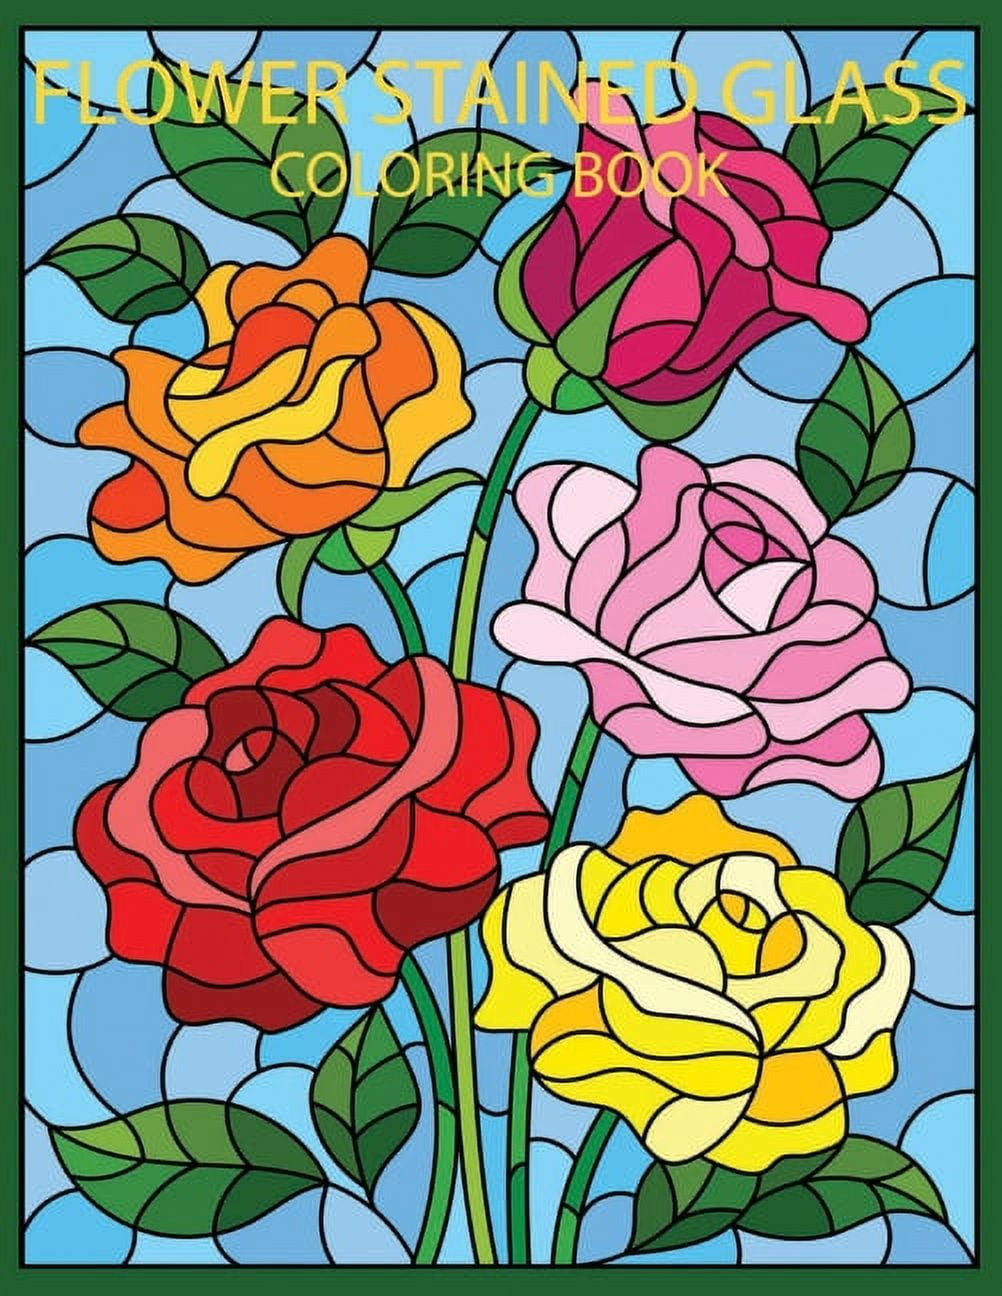 Flowers stained glass coloring book an adult coloring book with beautiful flower designs for relaxation and stress relief stained glass coloring books for adults paperback